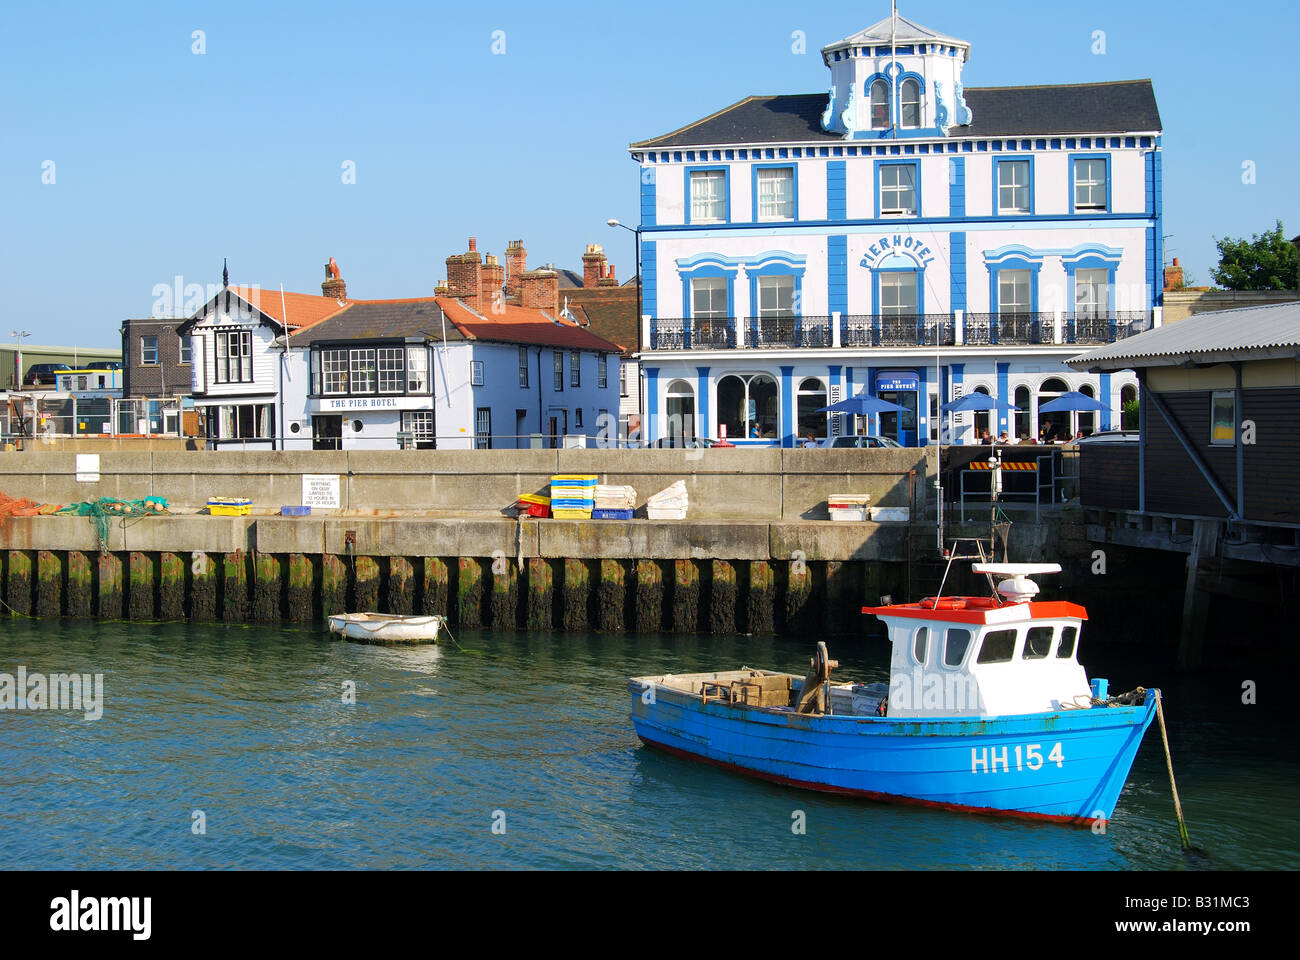 Pier Hotel, The Quay, Harwich, Tendring District, Essex, England, United Kingdom Stock Photo